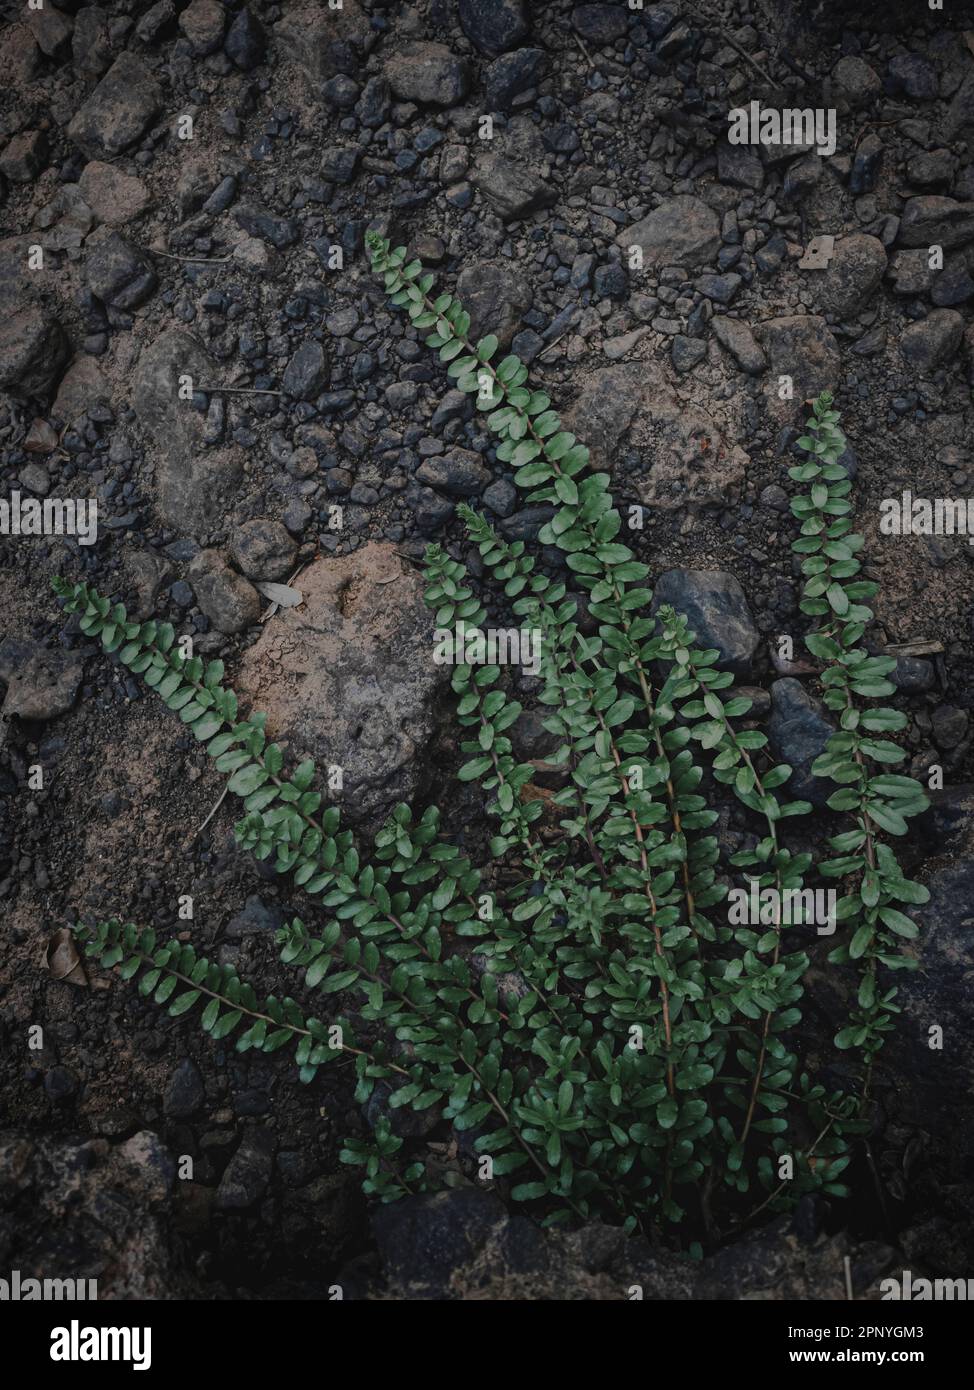 The Selectively focused image of a fern plant with Rock background. moody green, abstract. Stock Photo